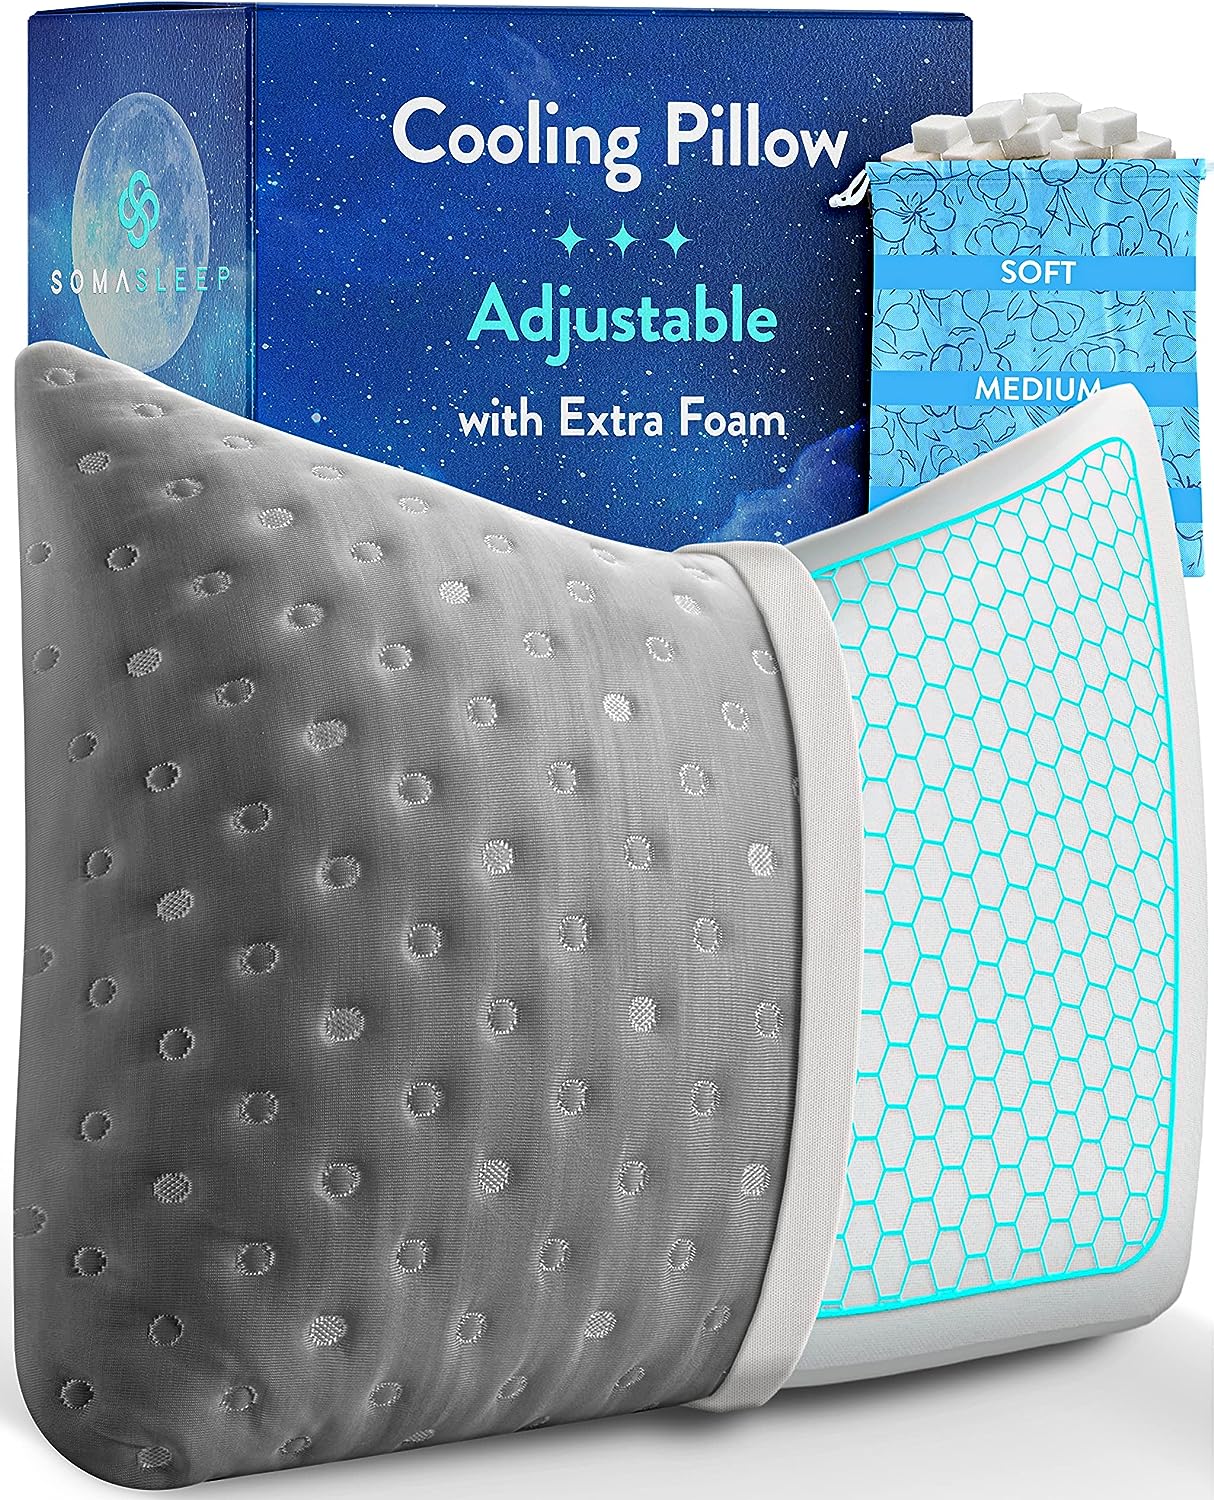 https://bigbigmart.com/wp-content/uploads/2023/08/Cooling-Pillow-for-Hot-Sleepers-Best-Curved-Side-Sleeper-Bed-Pillow-Anti-Wrinkle-Cool-Gel-Pillow-Gel-Cooling-Memory-Foam-Pillow-for-Neck-Back-and-Shoulder-Pain-Relief-and-Sleeping-Queen-Grey.jpg